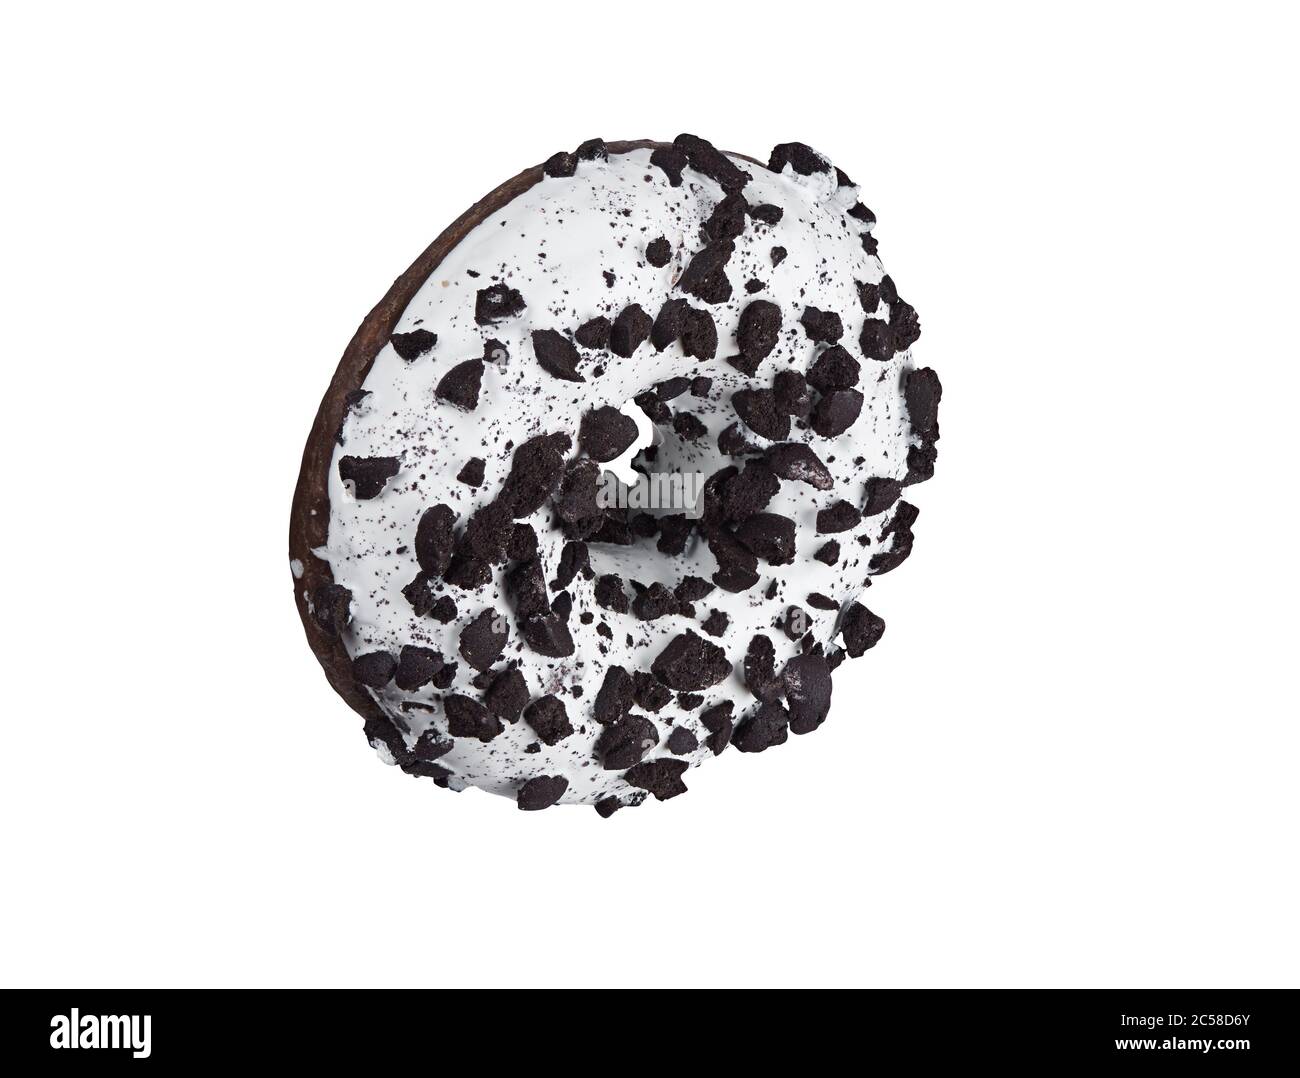 glazed round donut with sprinkles isolated on white background. Side view Stock Photo